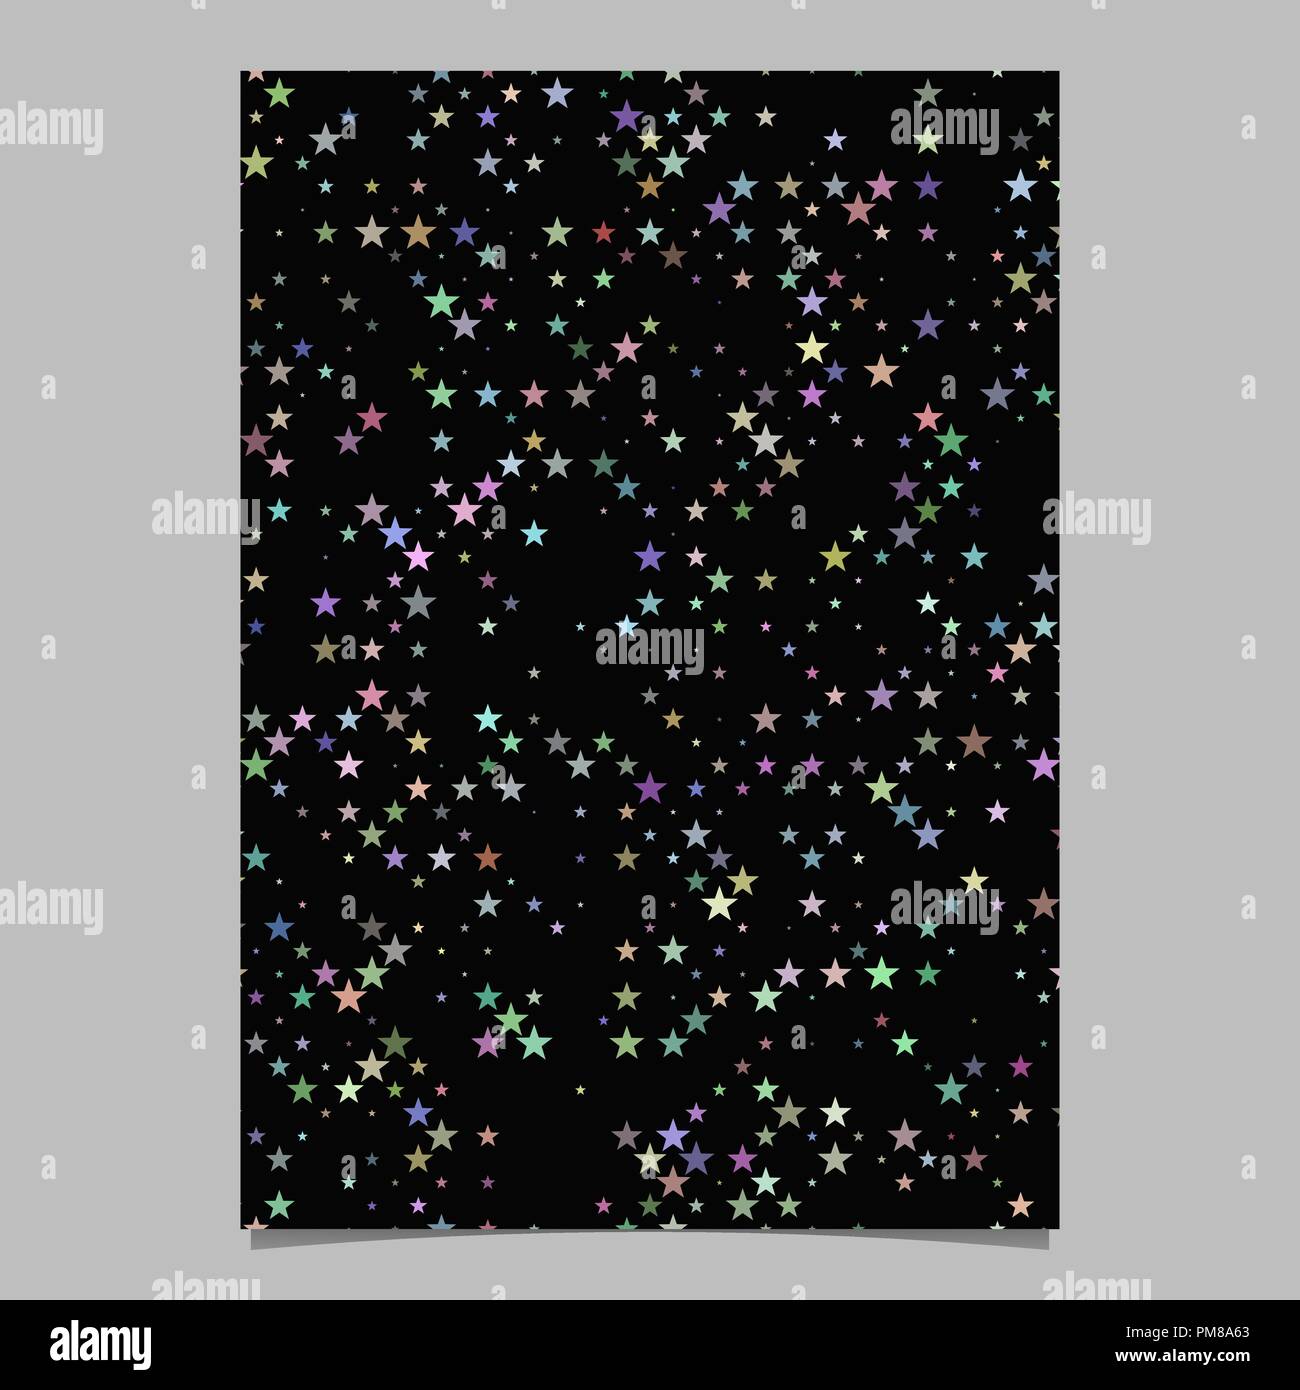 Star pattern poster template - vector document background graphic Stock Vector